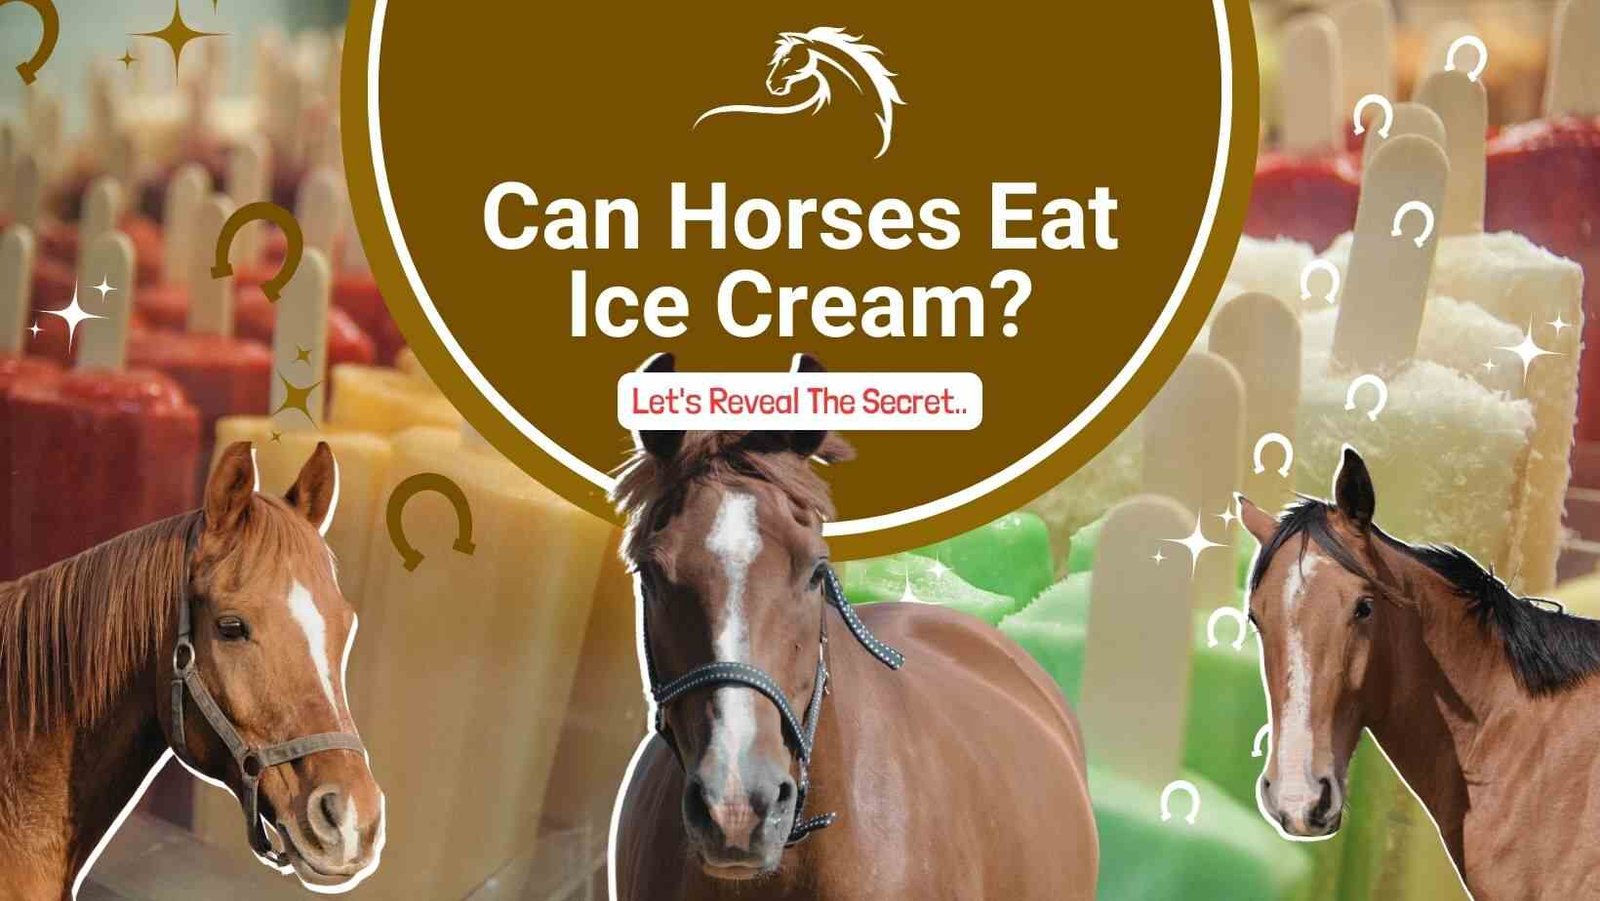 a brown circle, white horse head silhouette, and text about horses eating ice cream, surrounded by horse heads and ice cream cones on a brown background with gold trophy icons